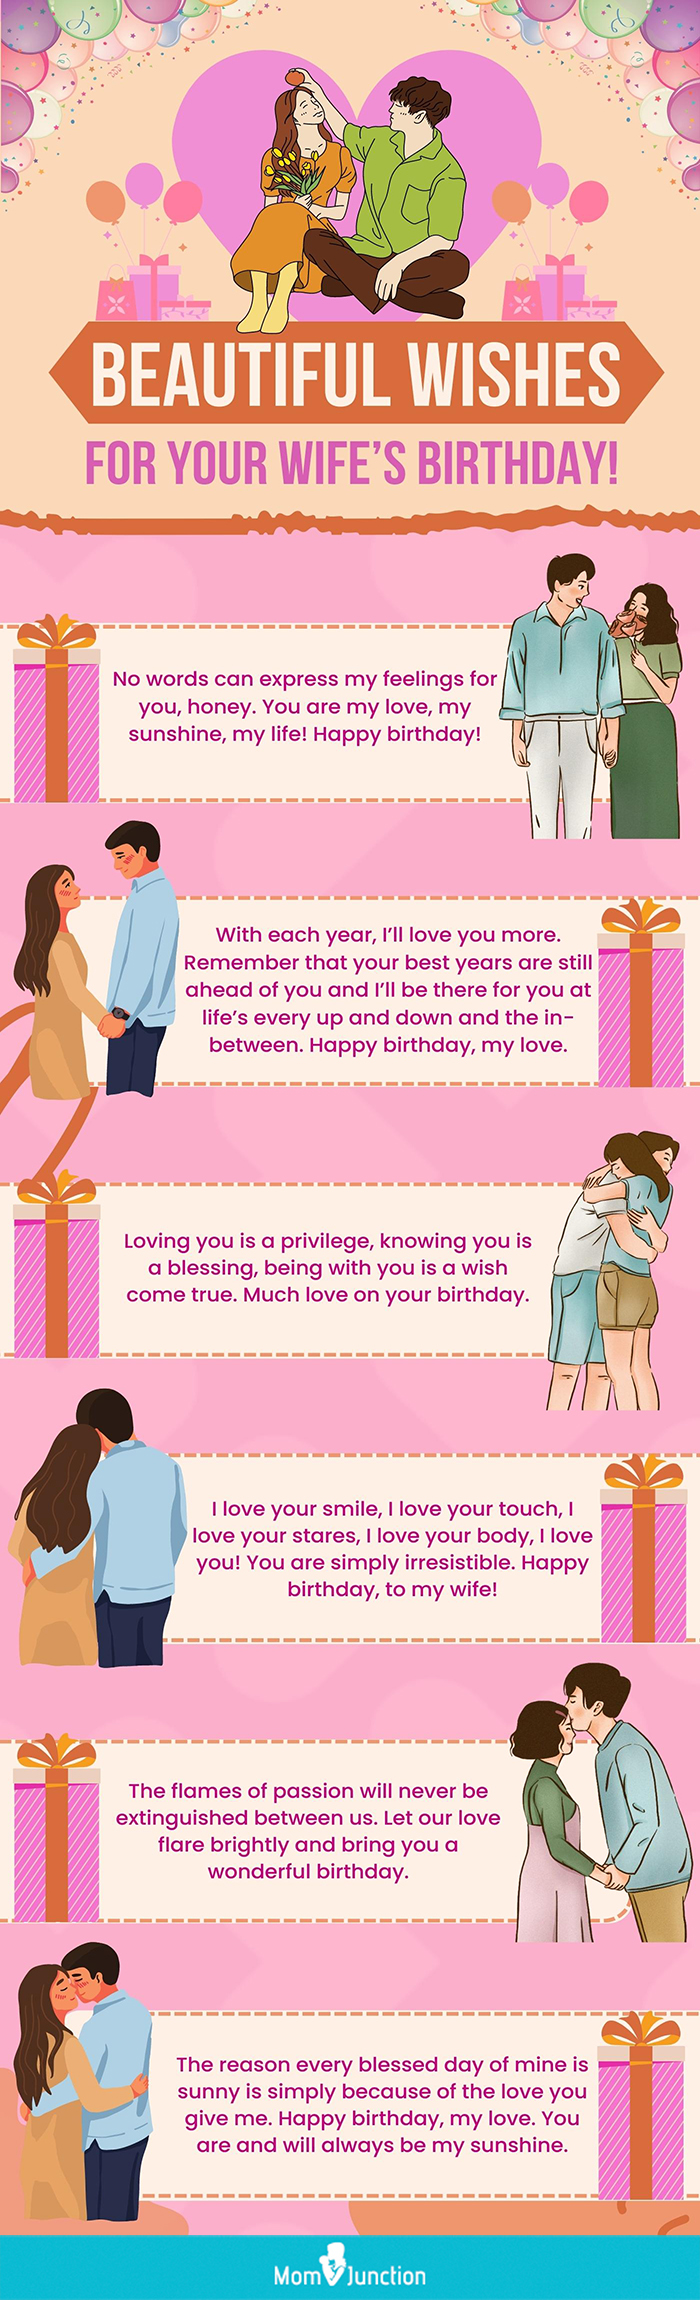 beautiful wishes for your wifes special day [infographic]